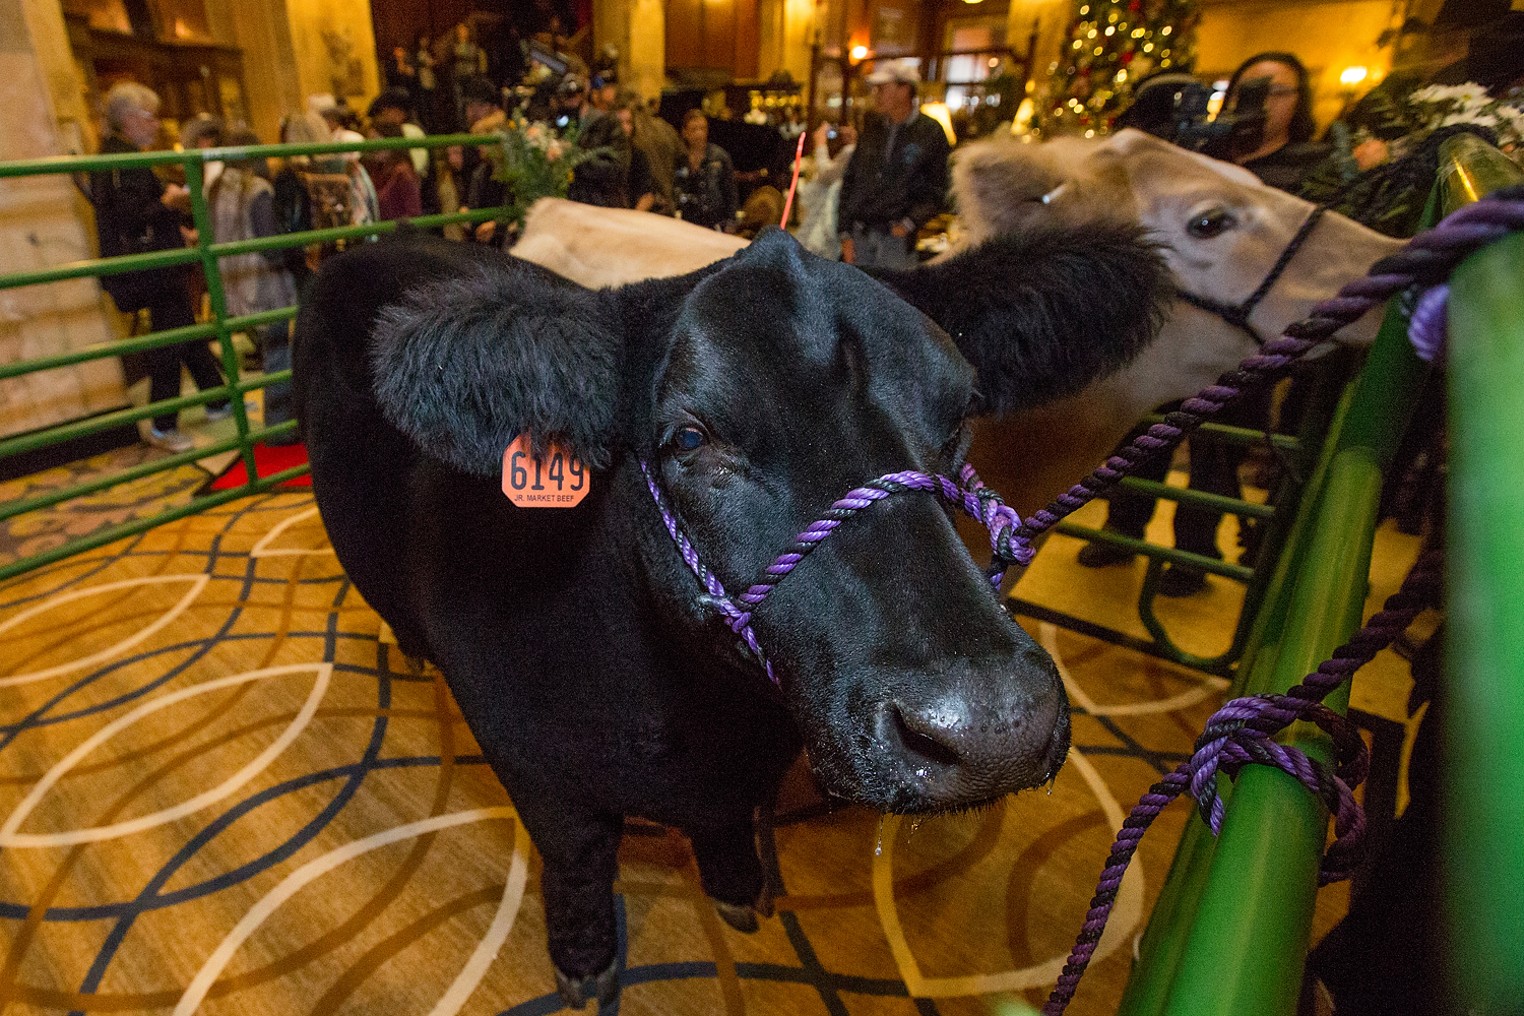 Brown Palace Hotel National Western Stock Show Winning Steers